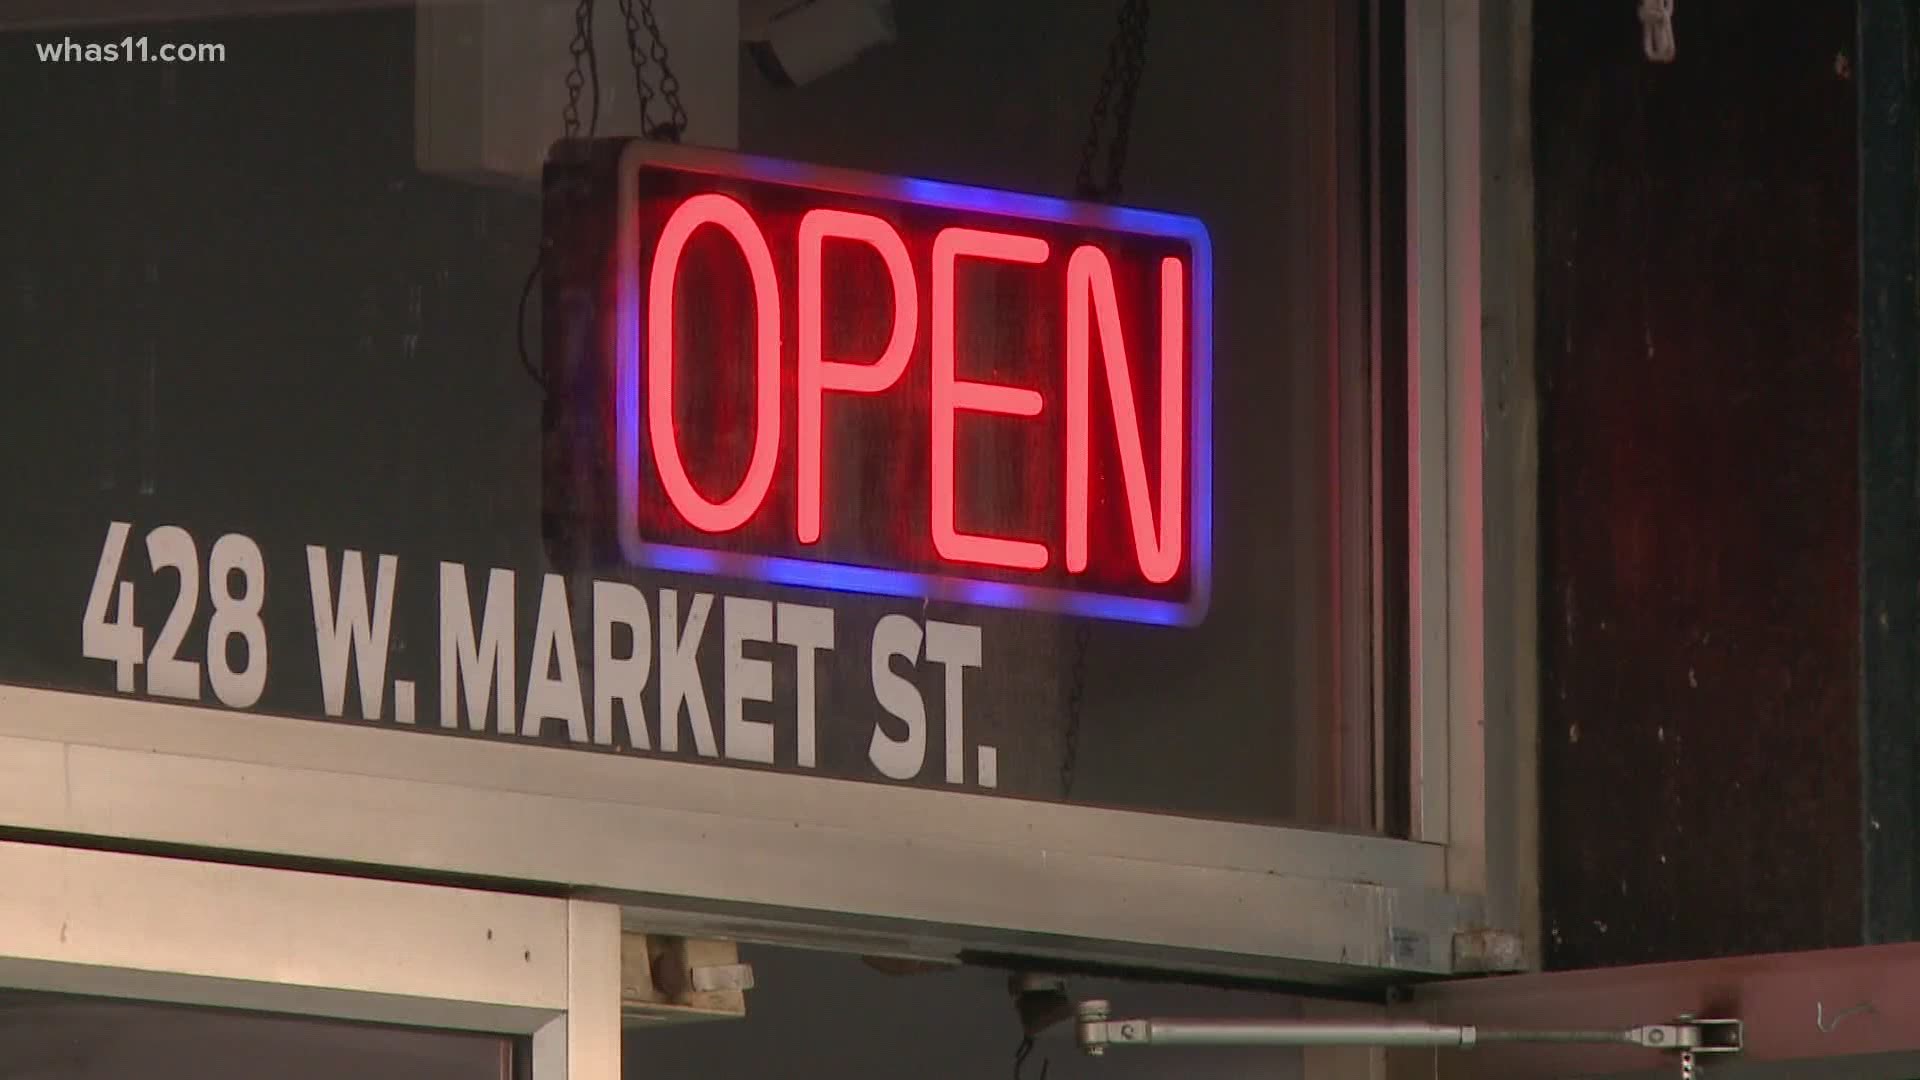 Nearly 300 businesses in Louisville have either closed their doors indefinitely or permanently since the pandemic, according to data compiled by Yelp.